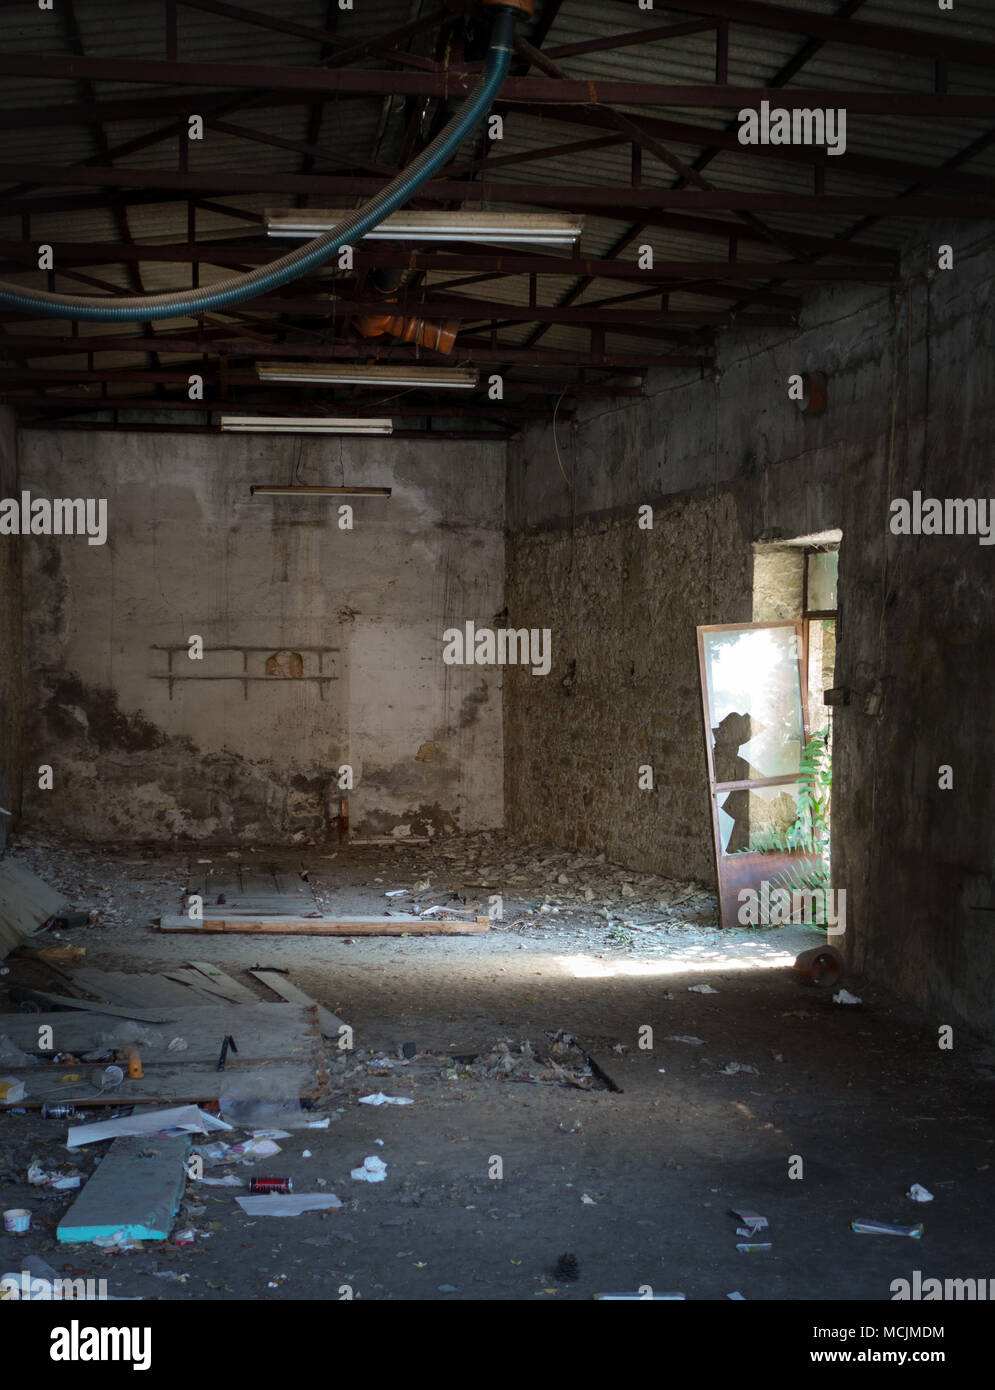 Old ruined building interior Stock Photo